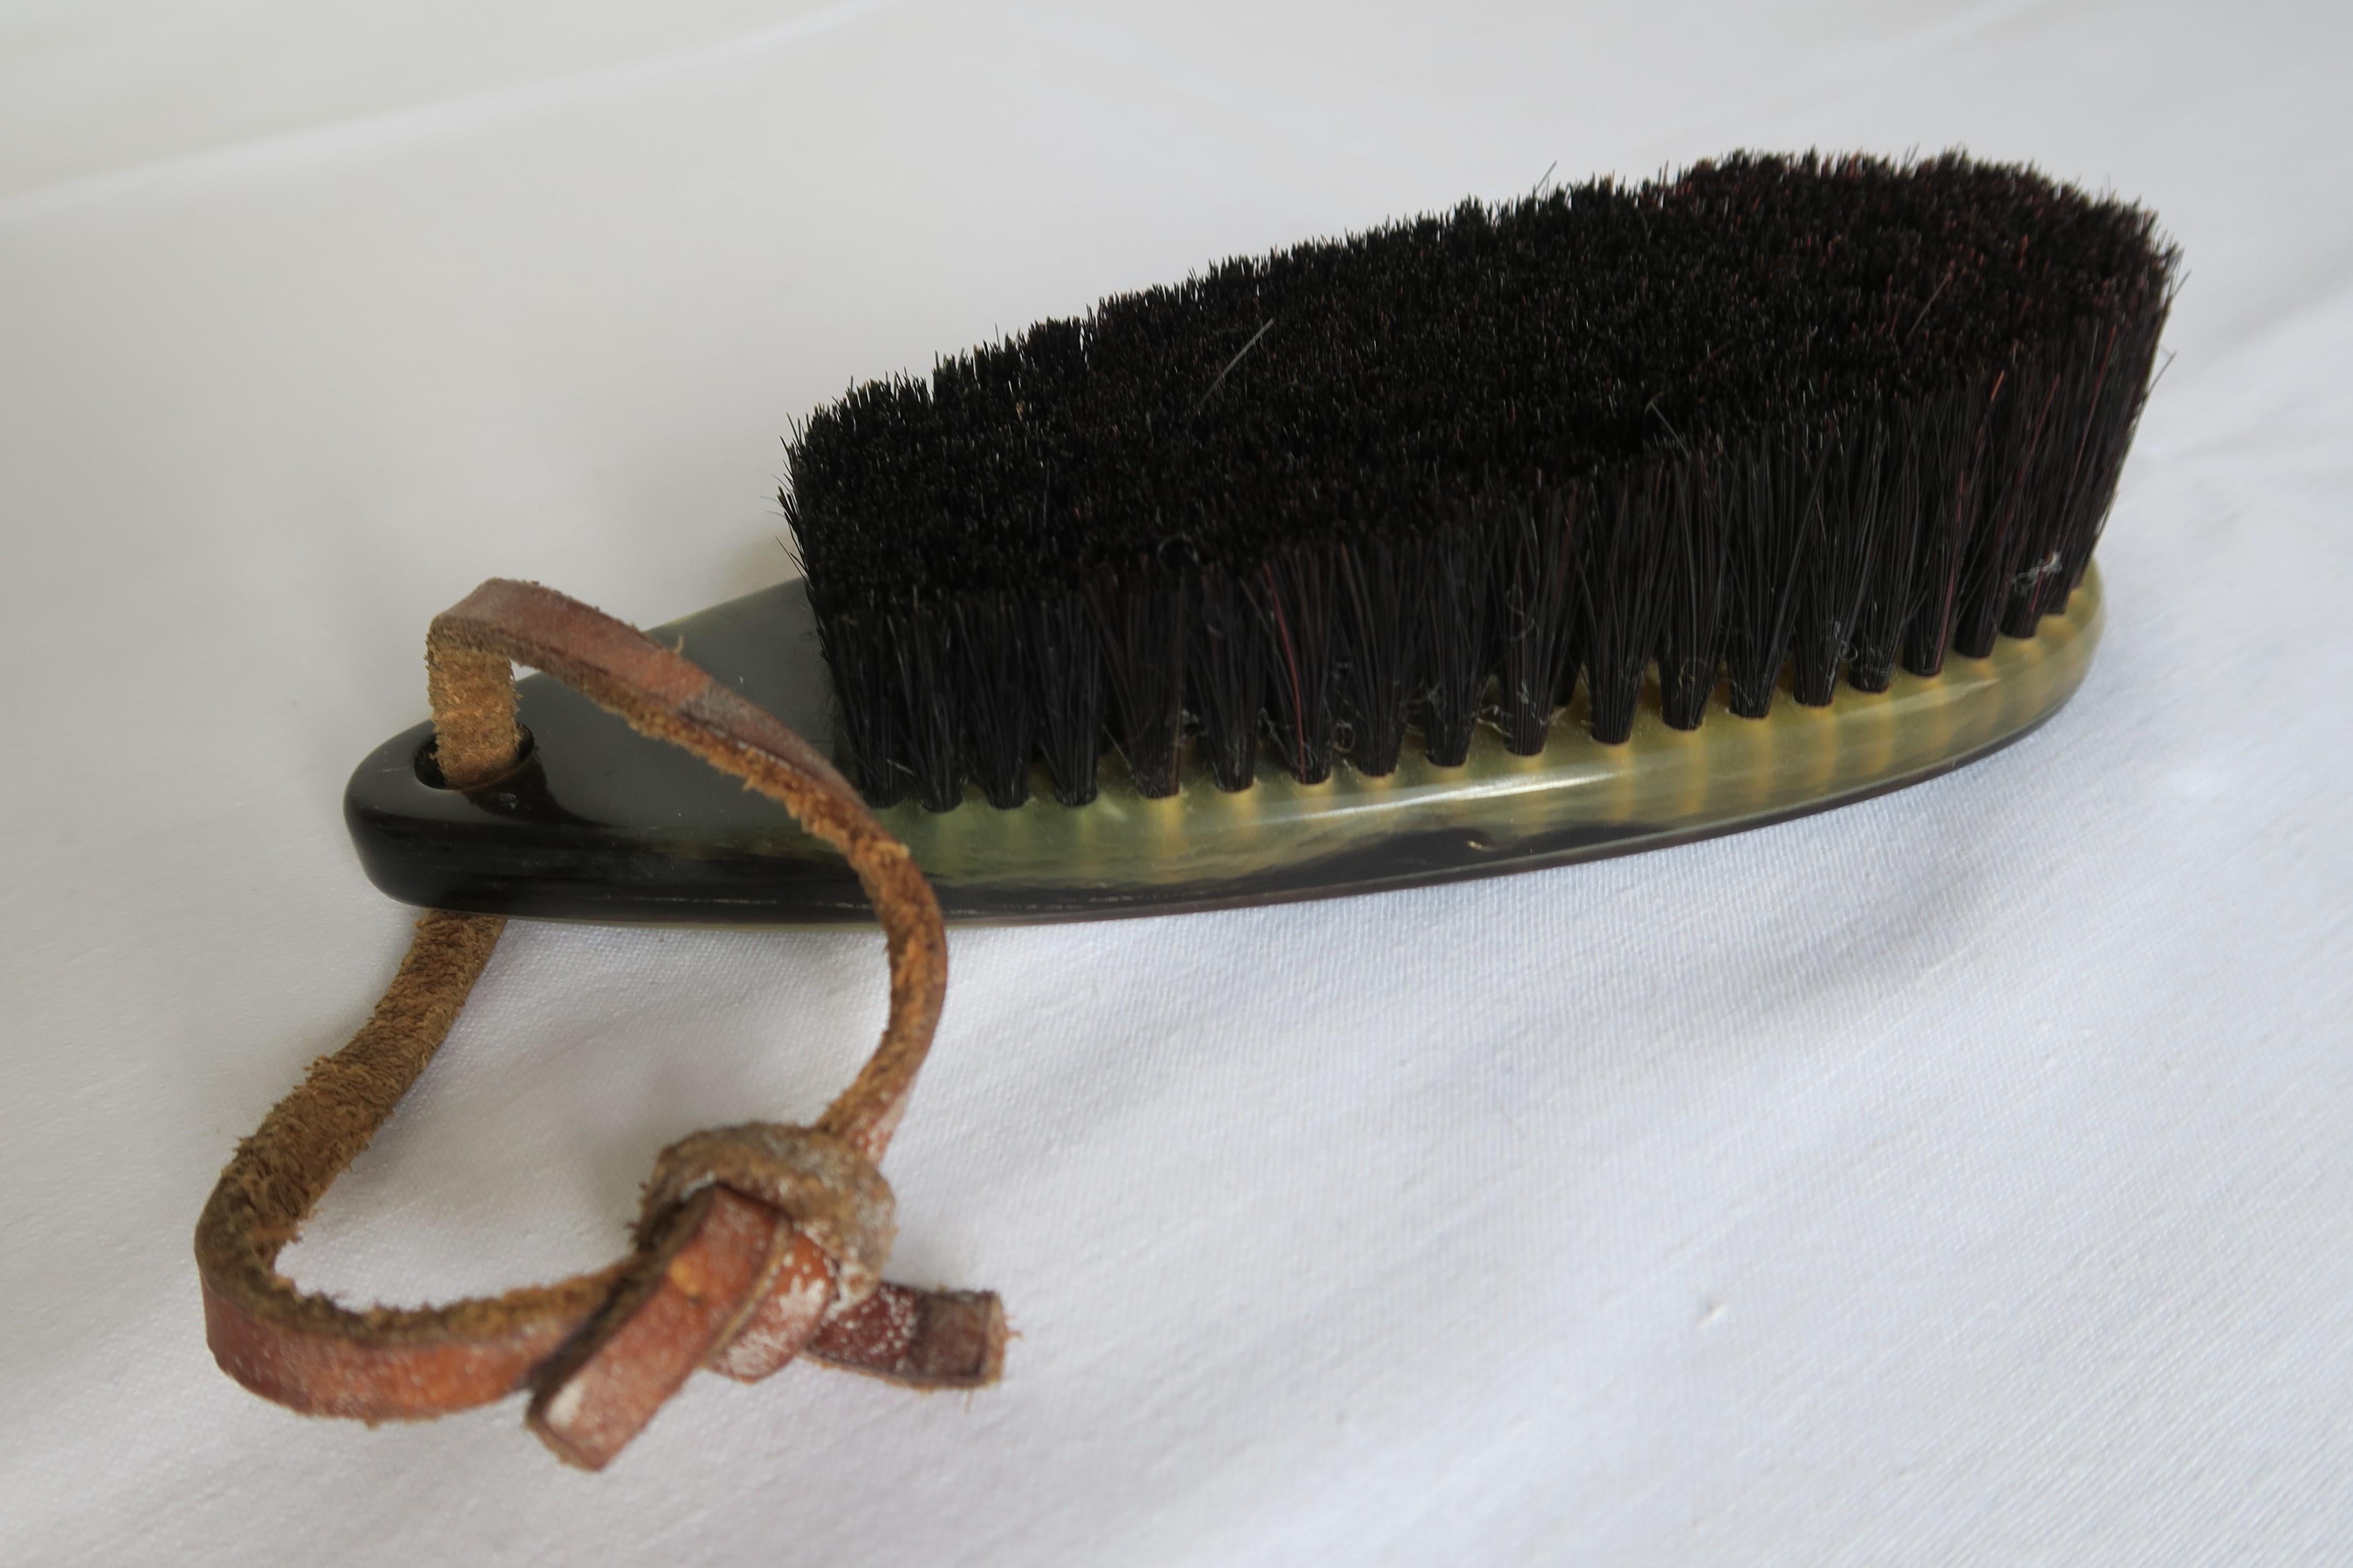 This crumb brush/table brush is a very special piece of Mid-Century design. Made by the famous Austrian Werkstätten Carl Auböck, it clearly displays Bauhaus influences. Its handle was hand-crafted from horn, the bristles are goat or horse hairs and